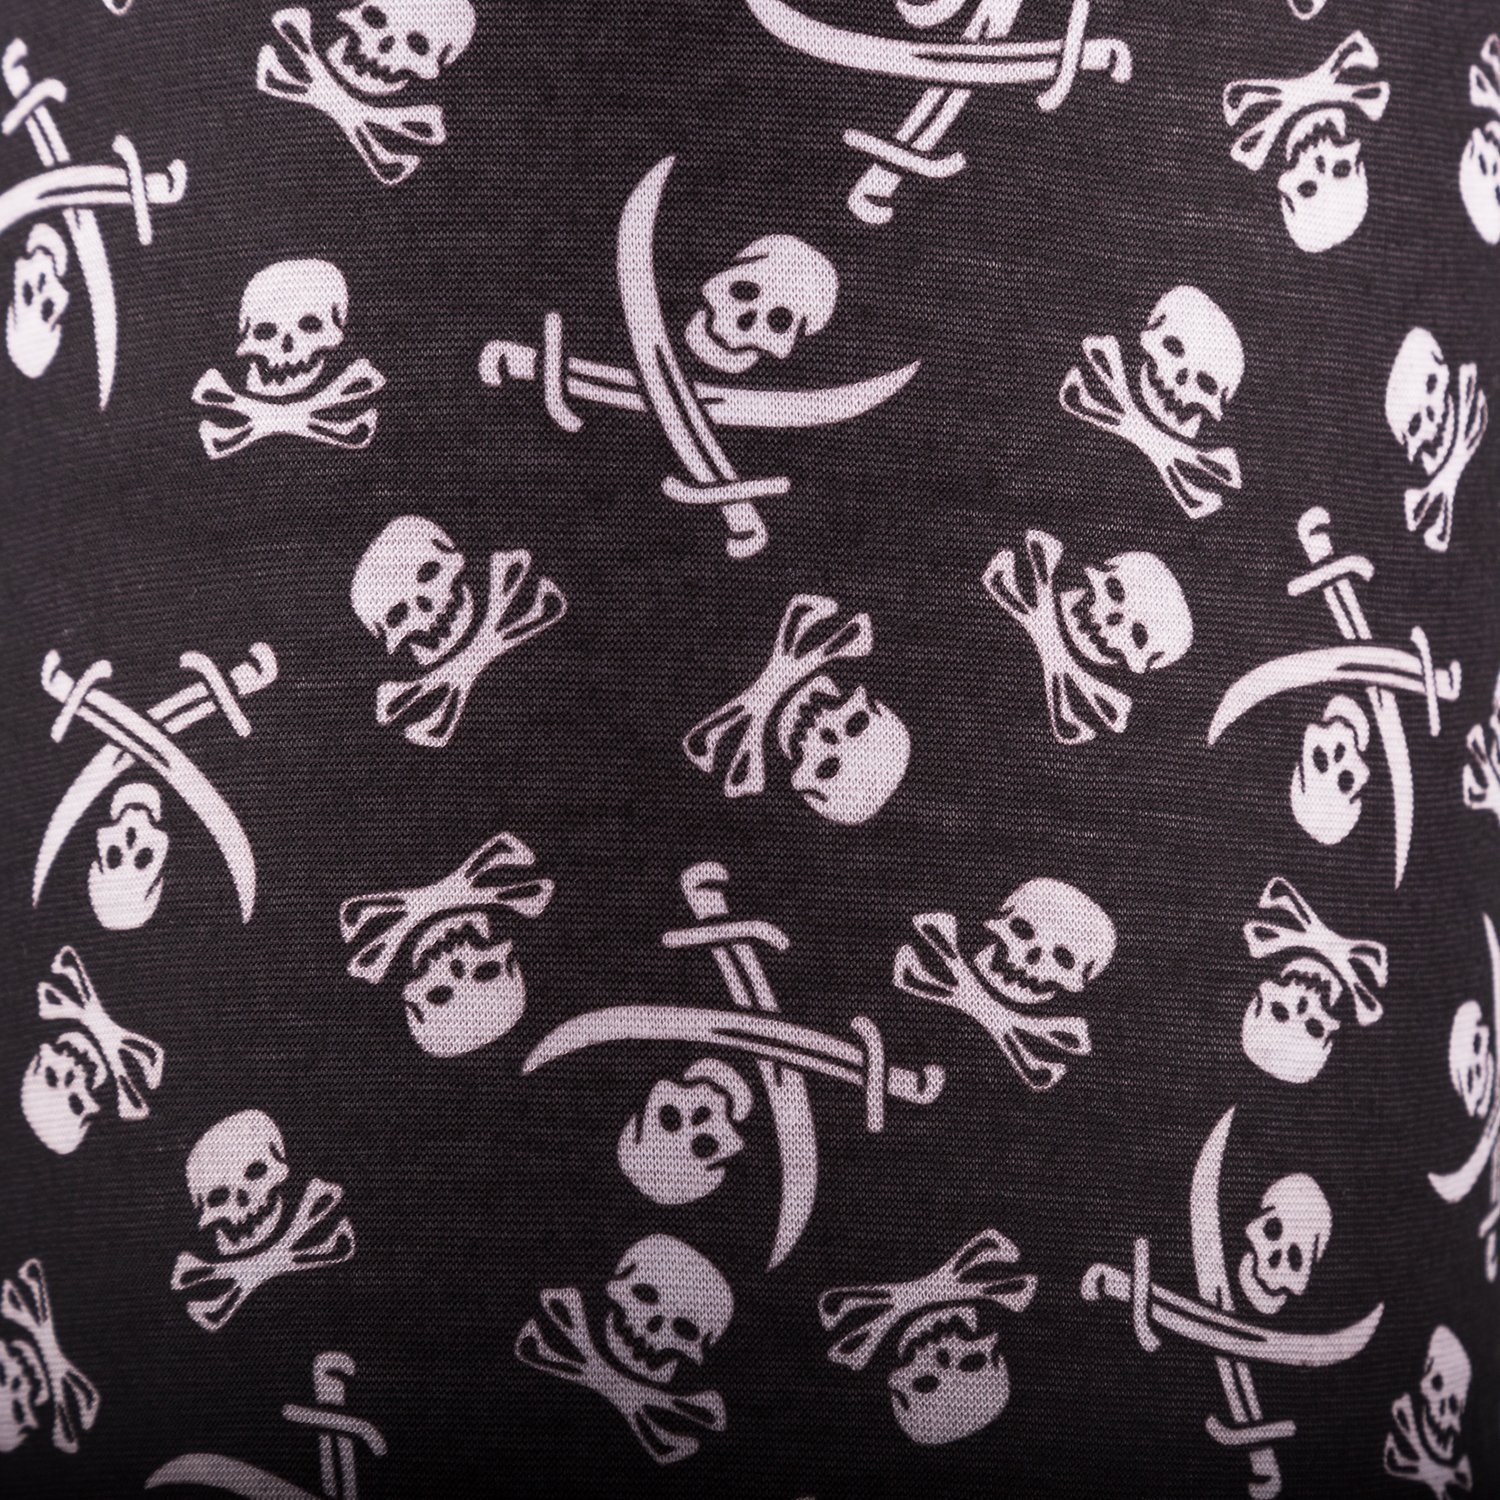 Pirate Skull Print Lycra Headwrap Bandana for Bikes (Black and White, Free Size) at Rs 61